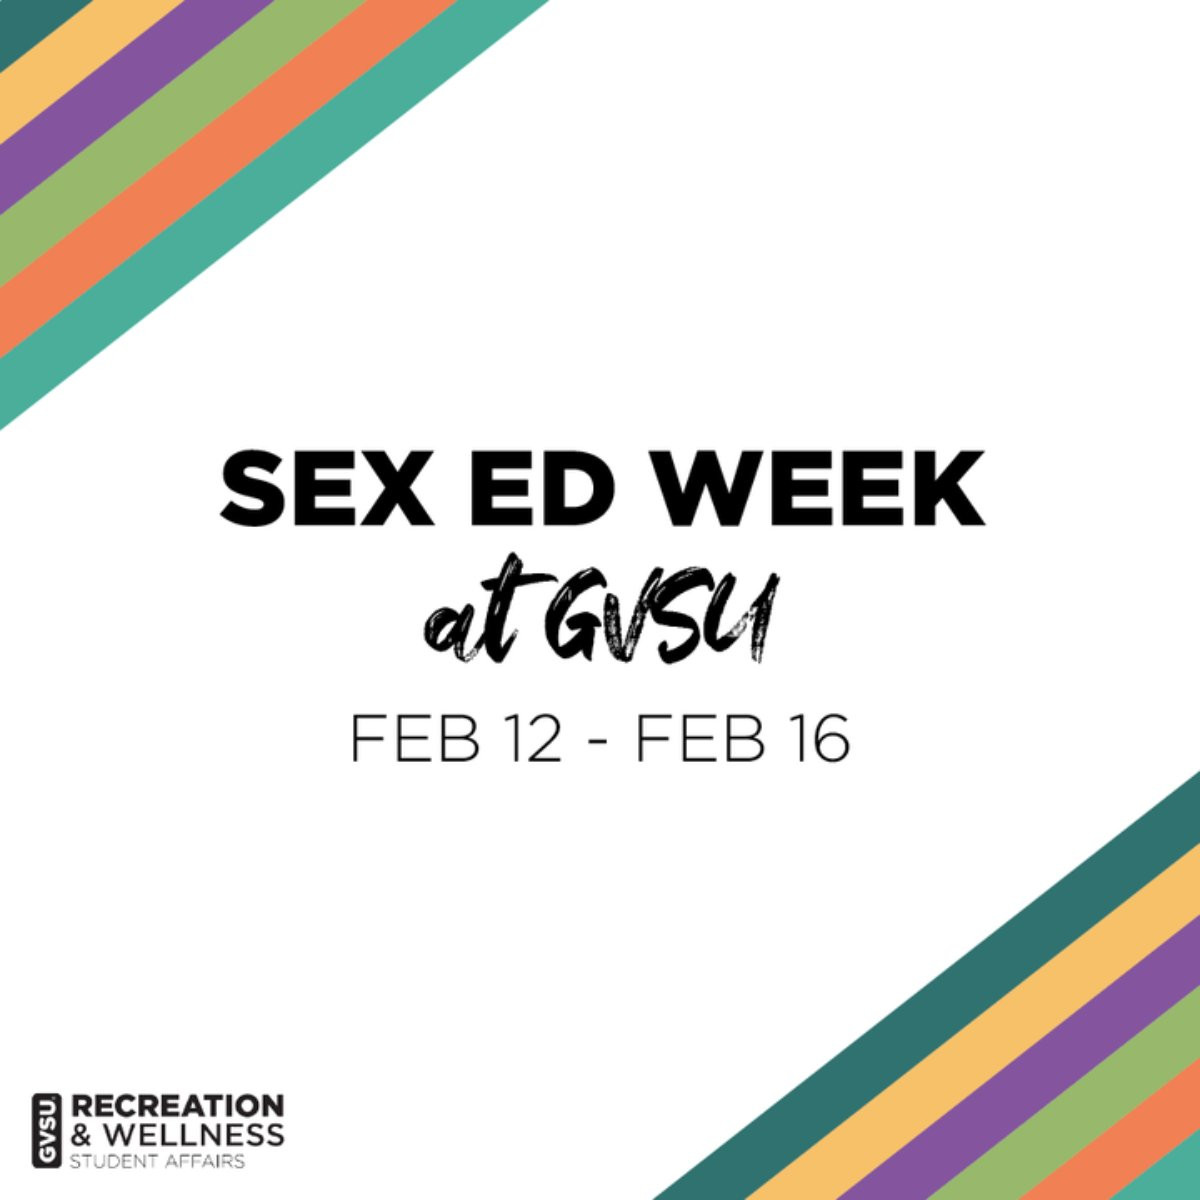 A graphic with text that says Sex Ed Week at GVSU Feb 12- Feb 16 with the RecWell logo in the bottom left corner and colorful stripes